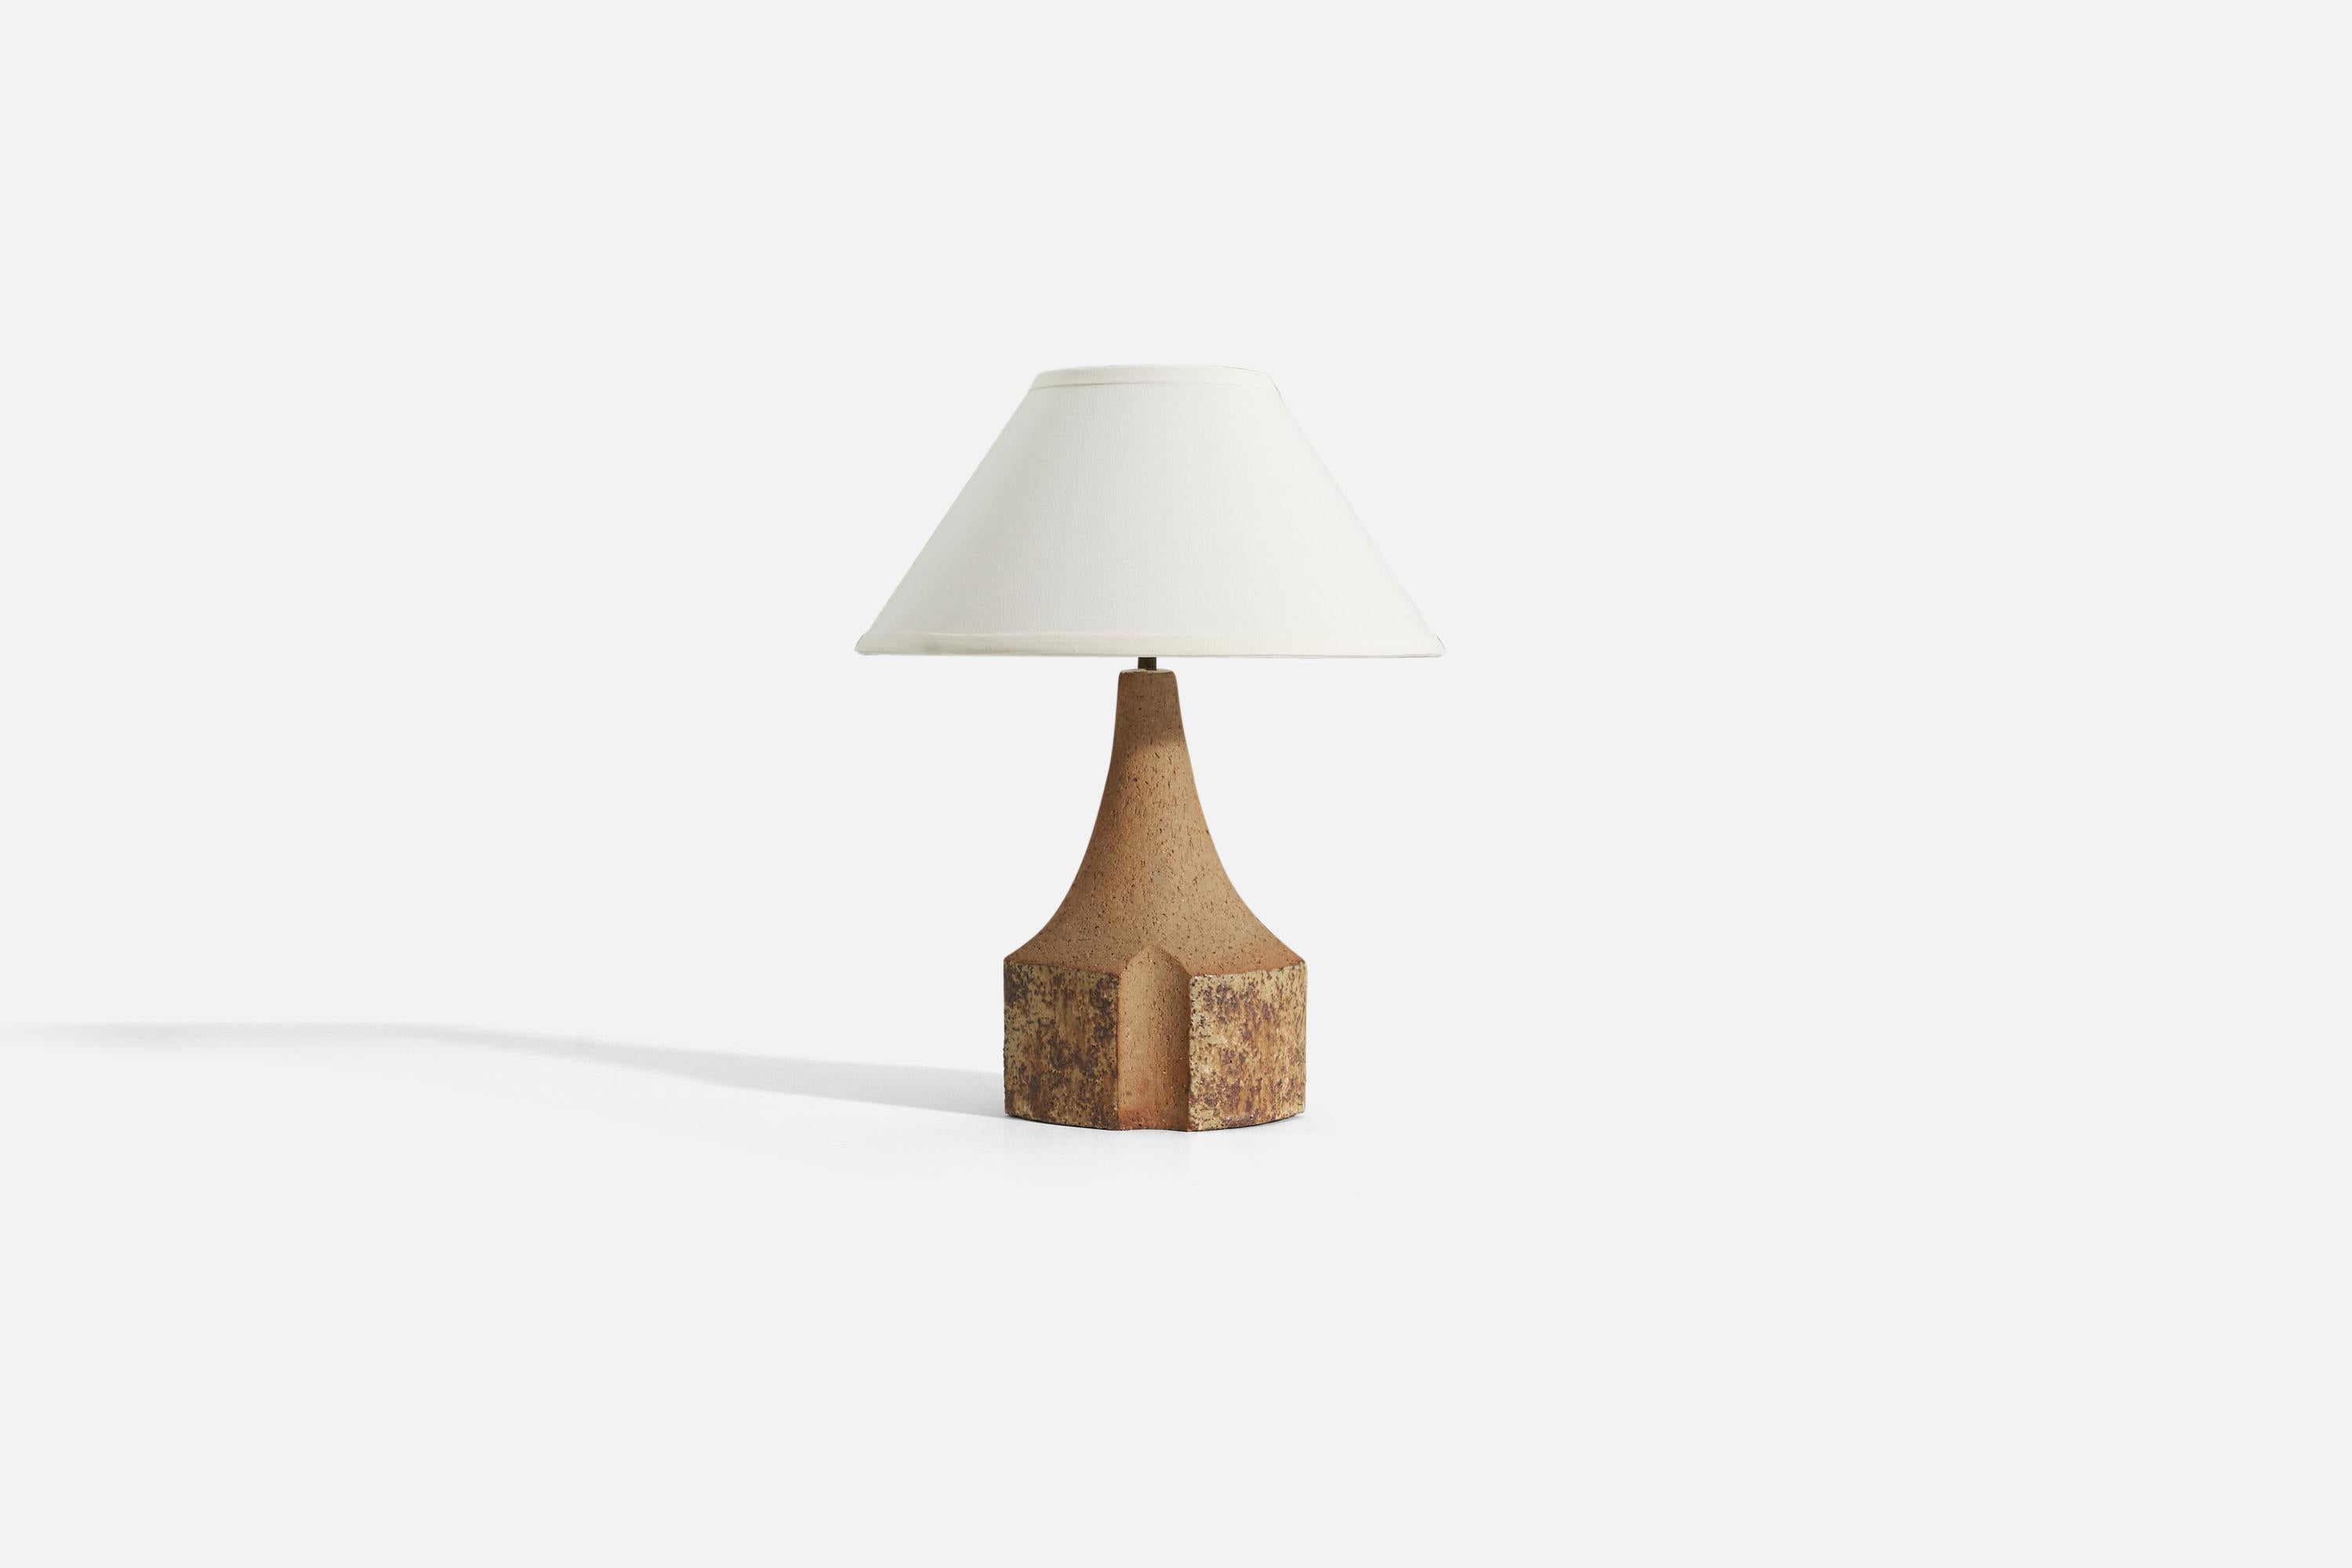 A sculptural stoneware table lamp, designed and produced in Denmark, c. 1960s.

Sold without lampshade. Measurements listed are of lamp itself. 

For reference. additional dimensions below. 
Measurements of shade : 5.75 x 14 x 8 - (T x B x